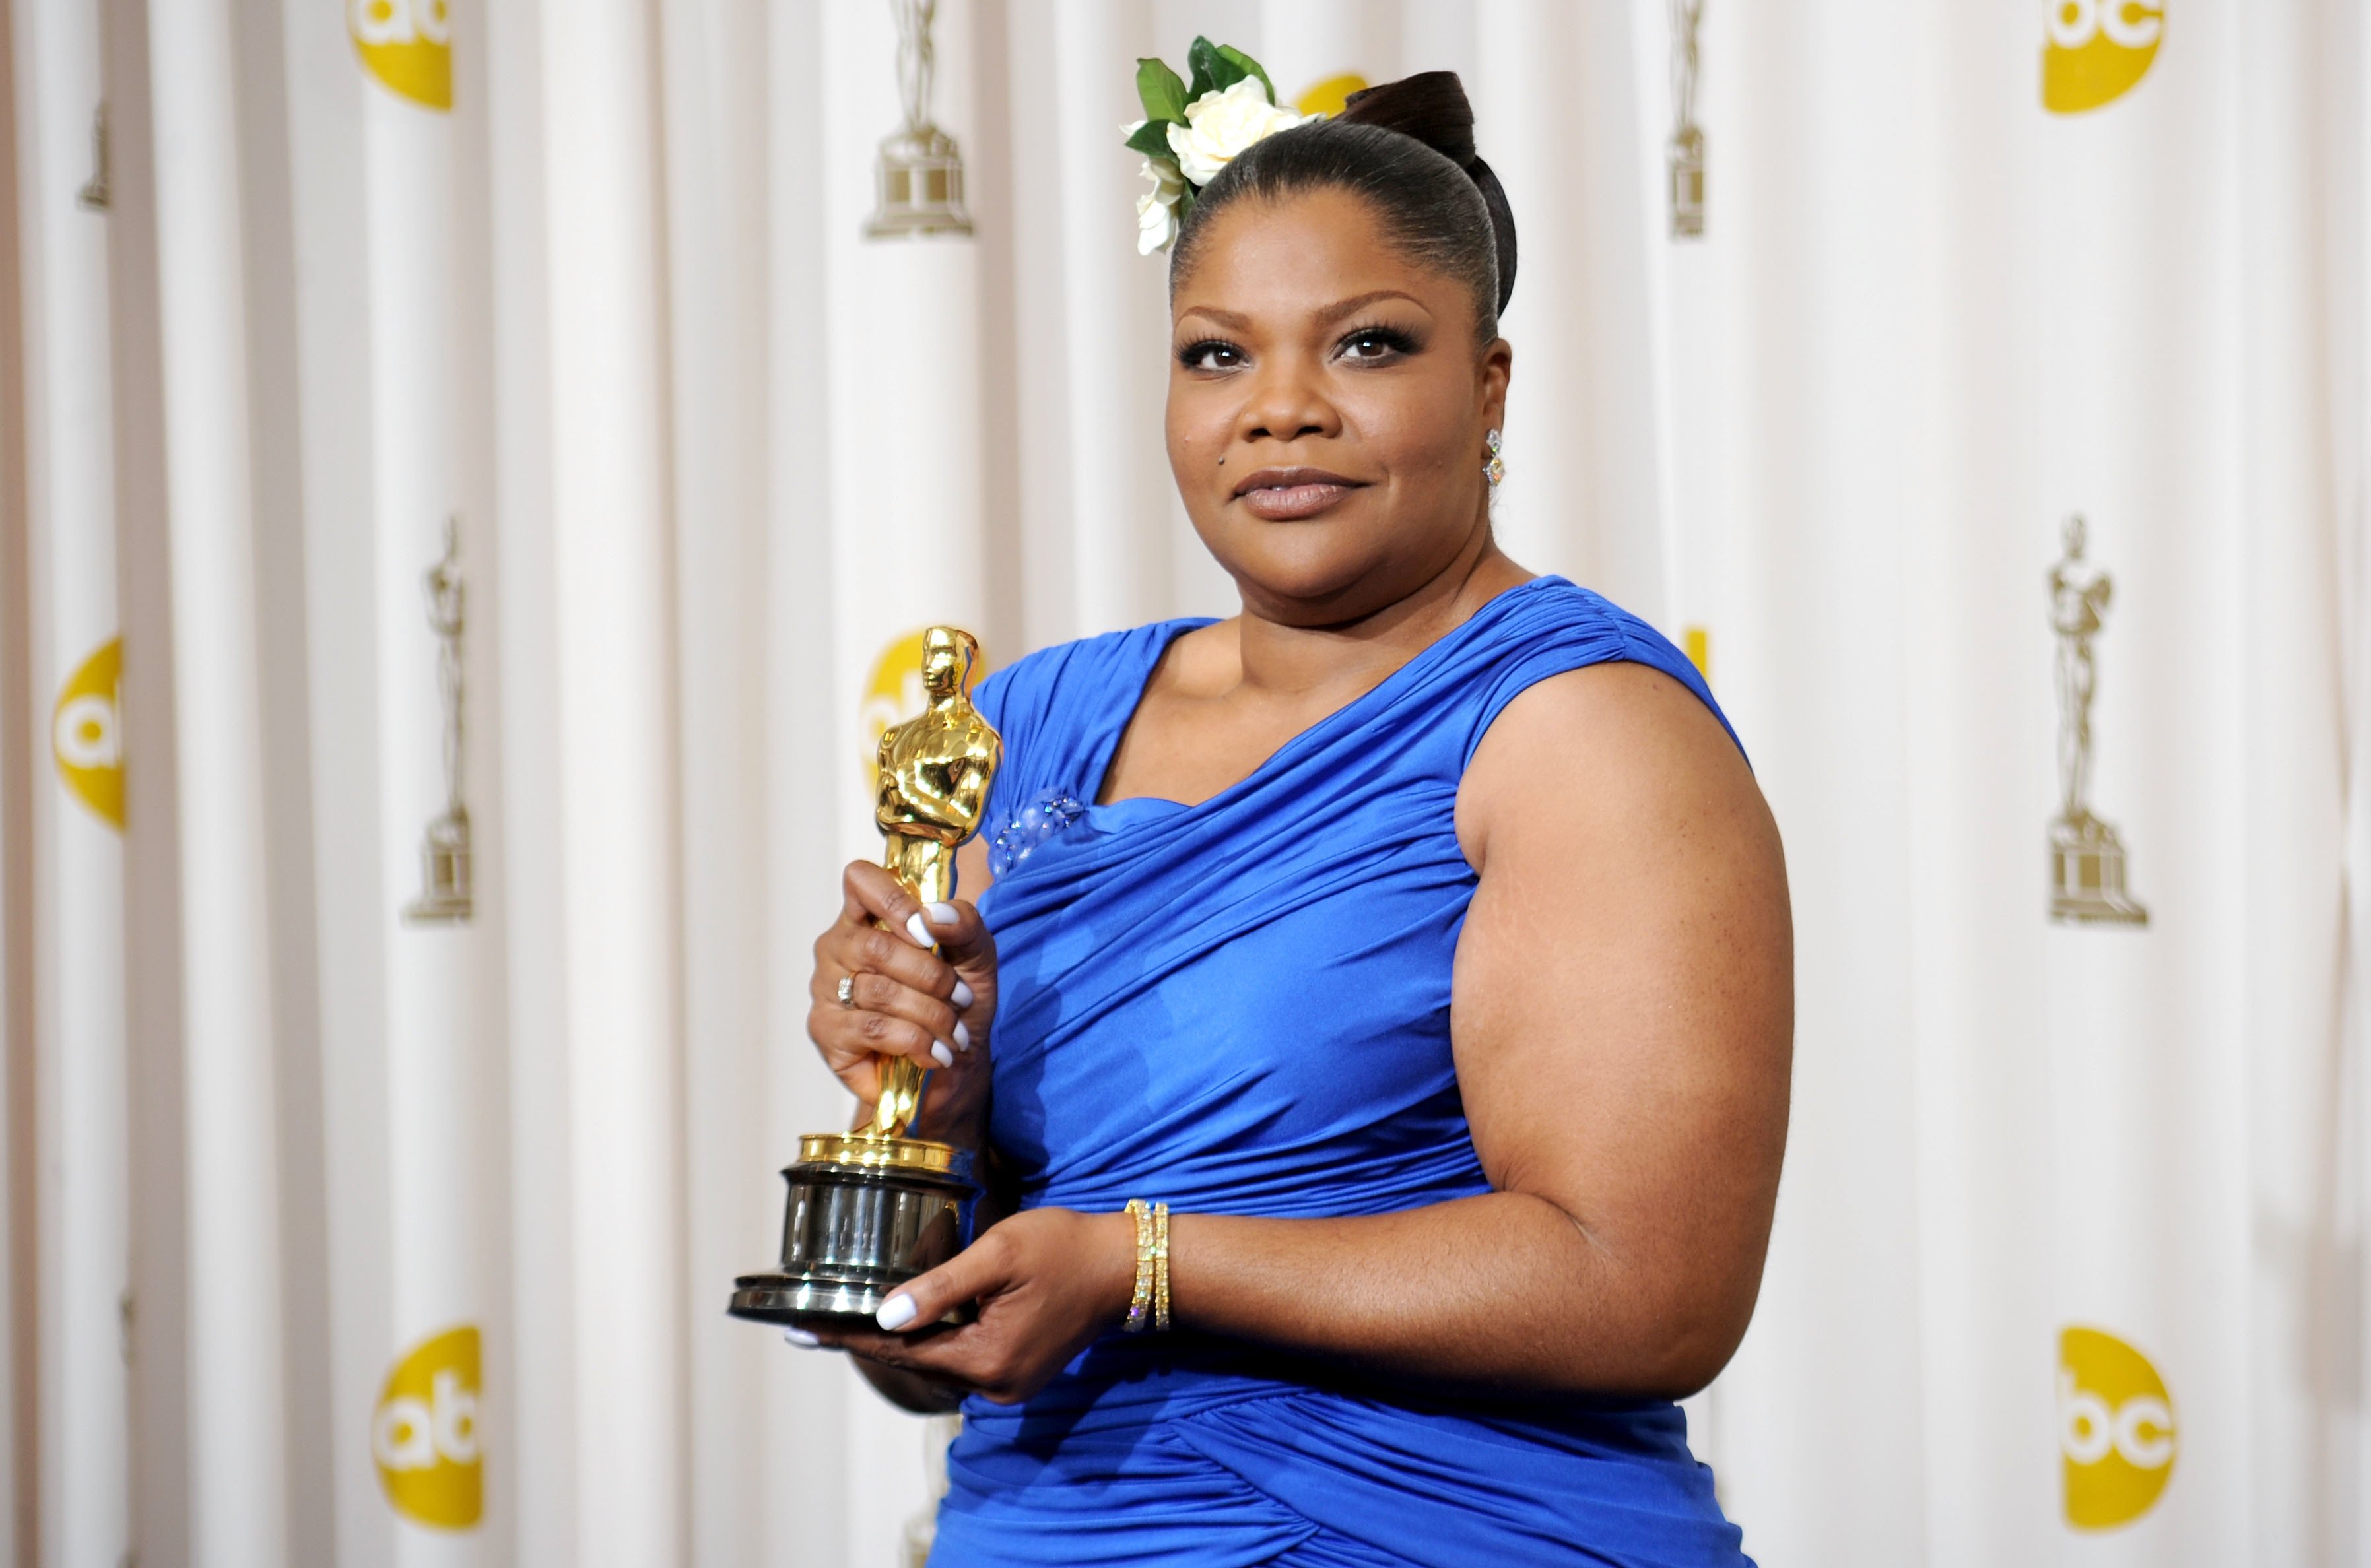 Mo'Nique at the 2010 Academy Awards, where she won the Oscar for Best Supporting Actress for "Precious"/ Getty Images